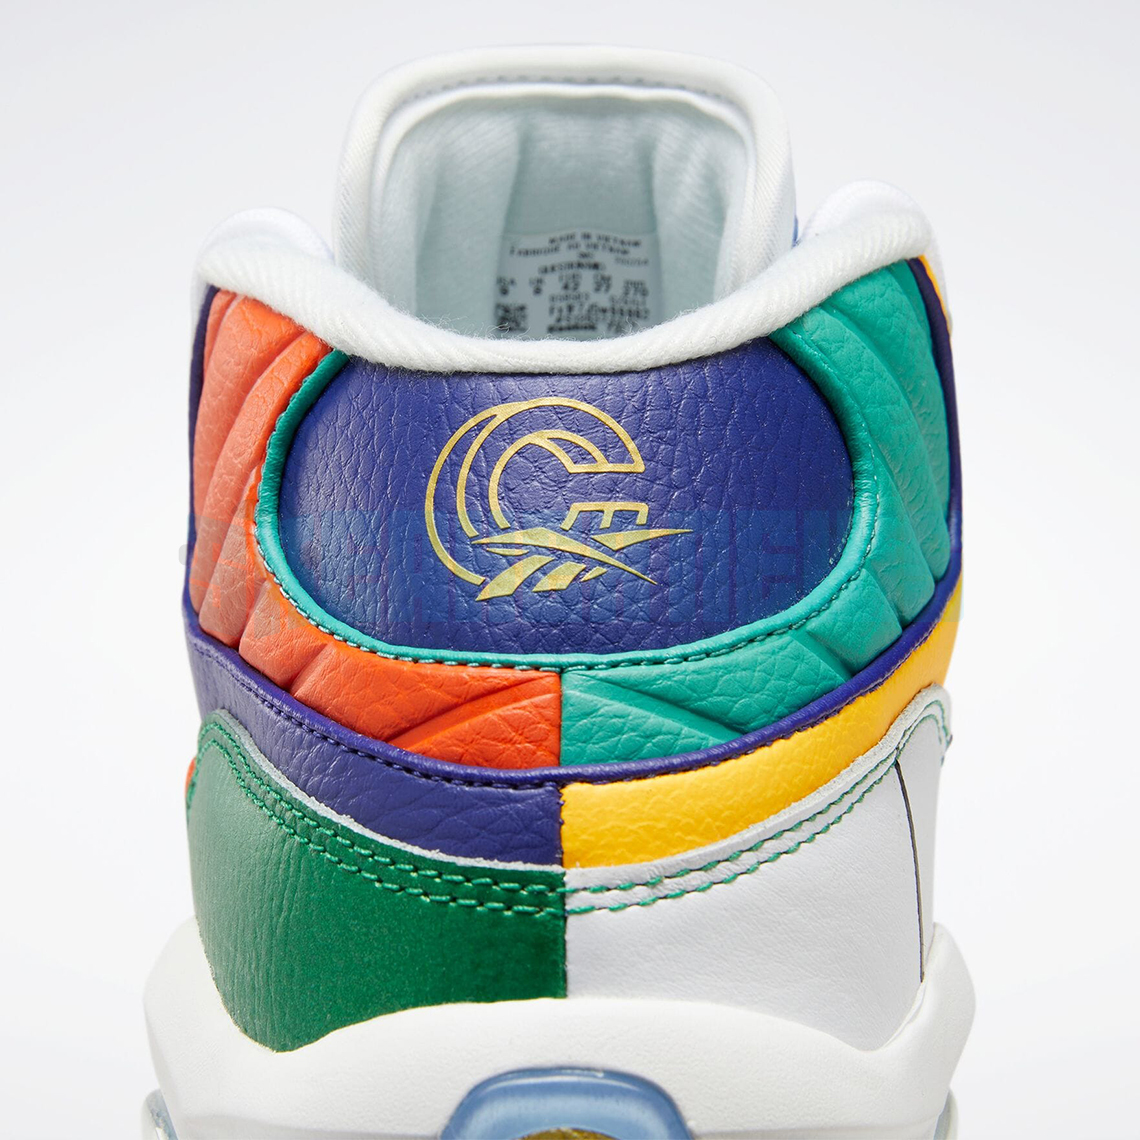 Concepts Reebok Question Mid Release Date 7